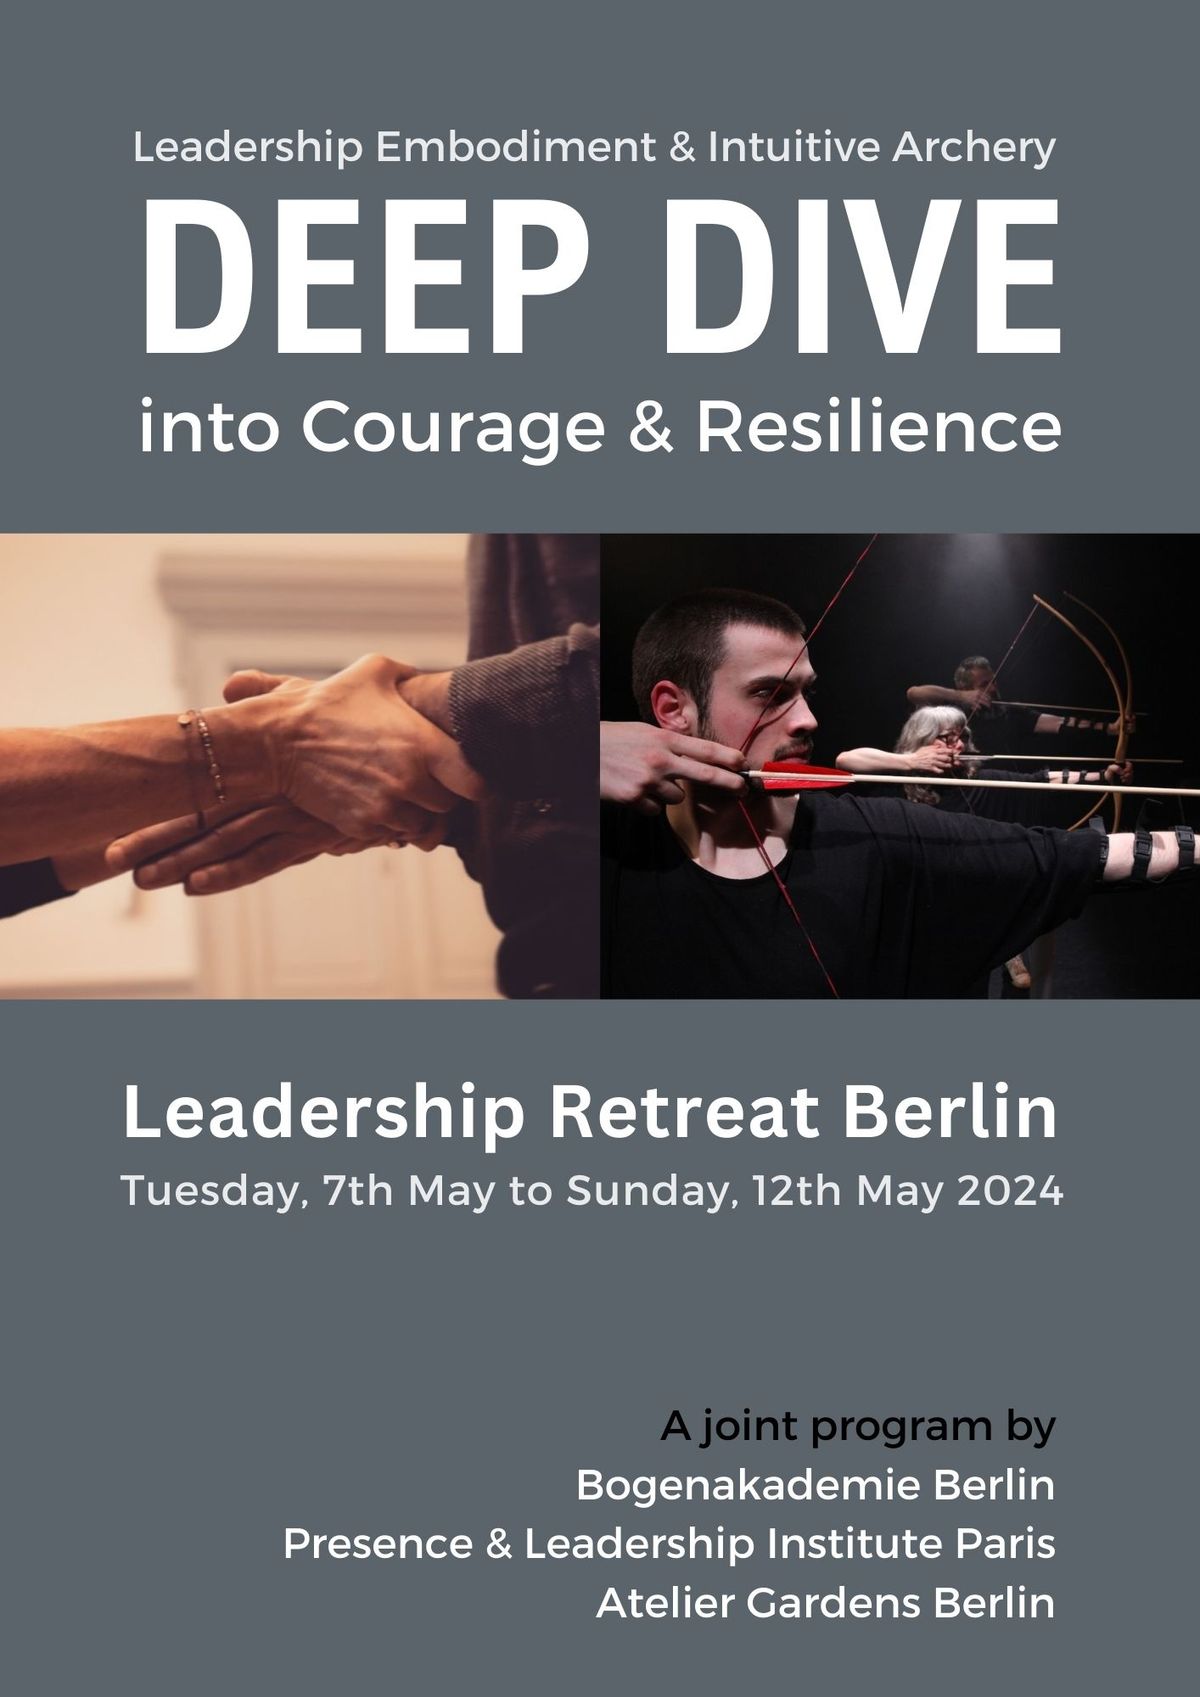 DEEP DIVE into courage and resilience.  #EMBODIMENT meets #ARCHERY! 